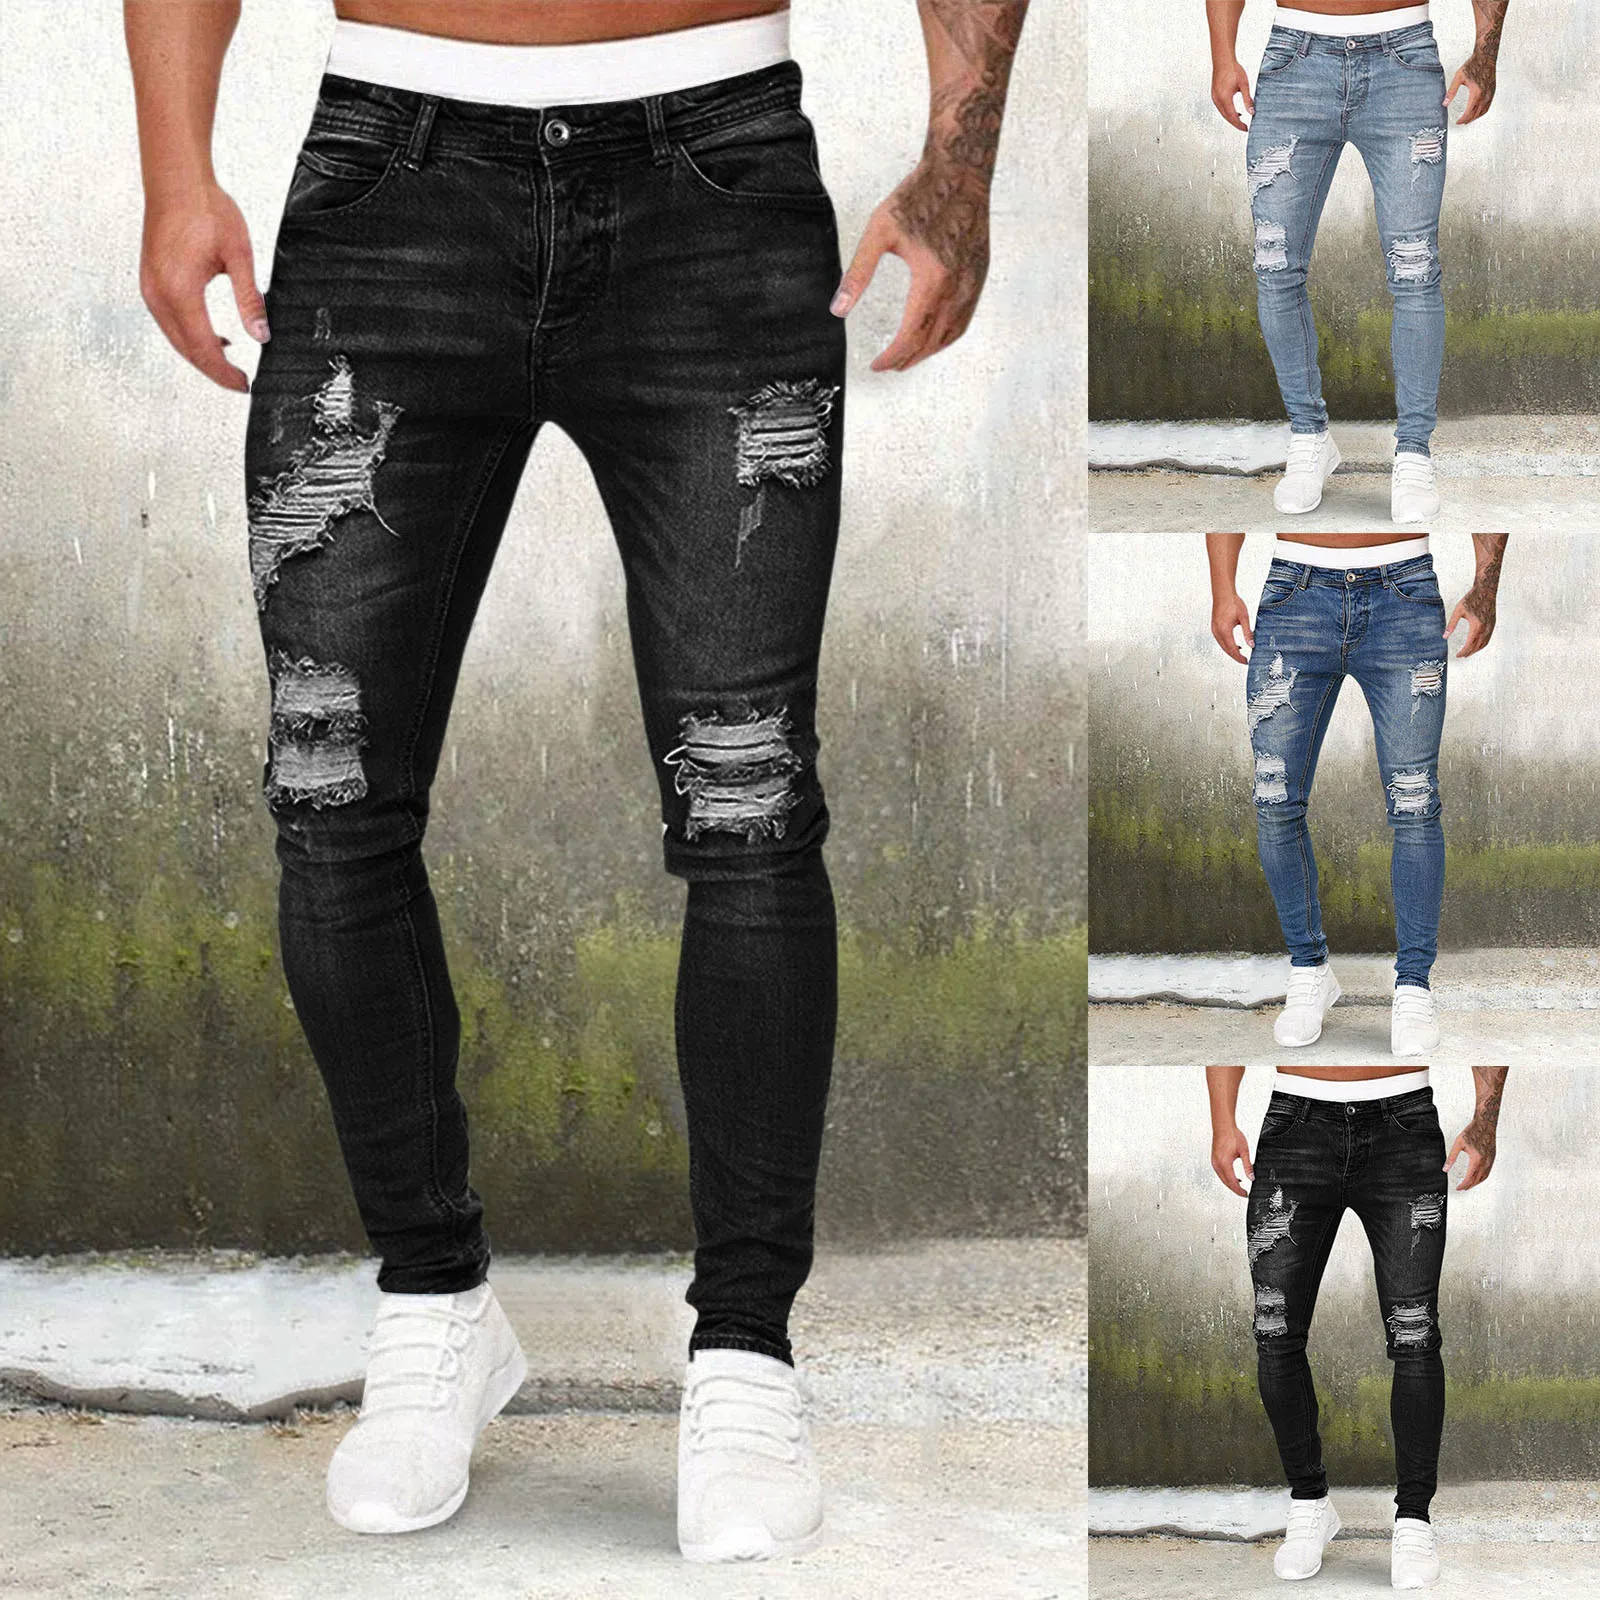 Europe America Mens Ripped Skinny Jeans Blue Slim Hole Pencil Pants Biker Casual Trousers Streetwear High Quality Denim Clothing 2021 newest hot womens stretch skinny ripped hole washed denim jeans female slim trousers high waist pencil pants trousers